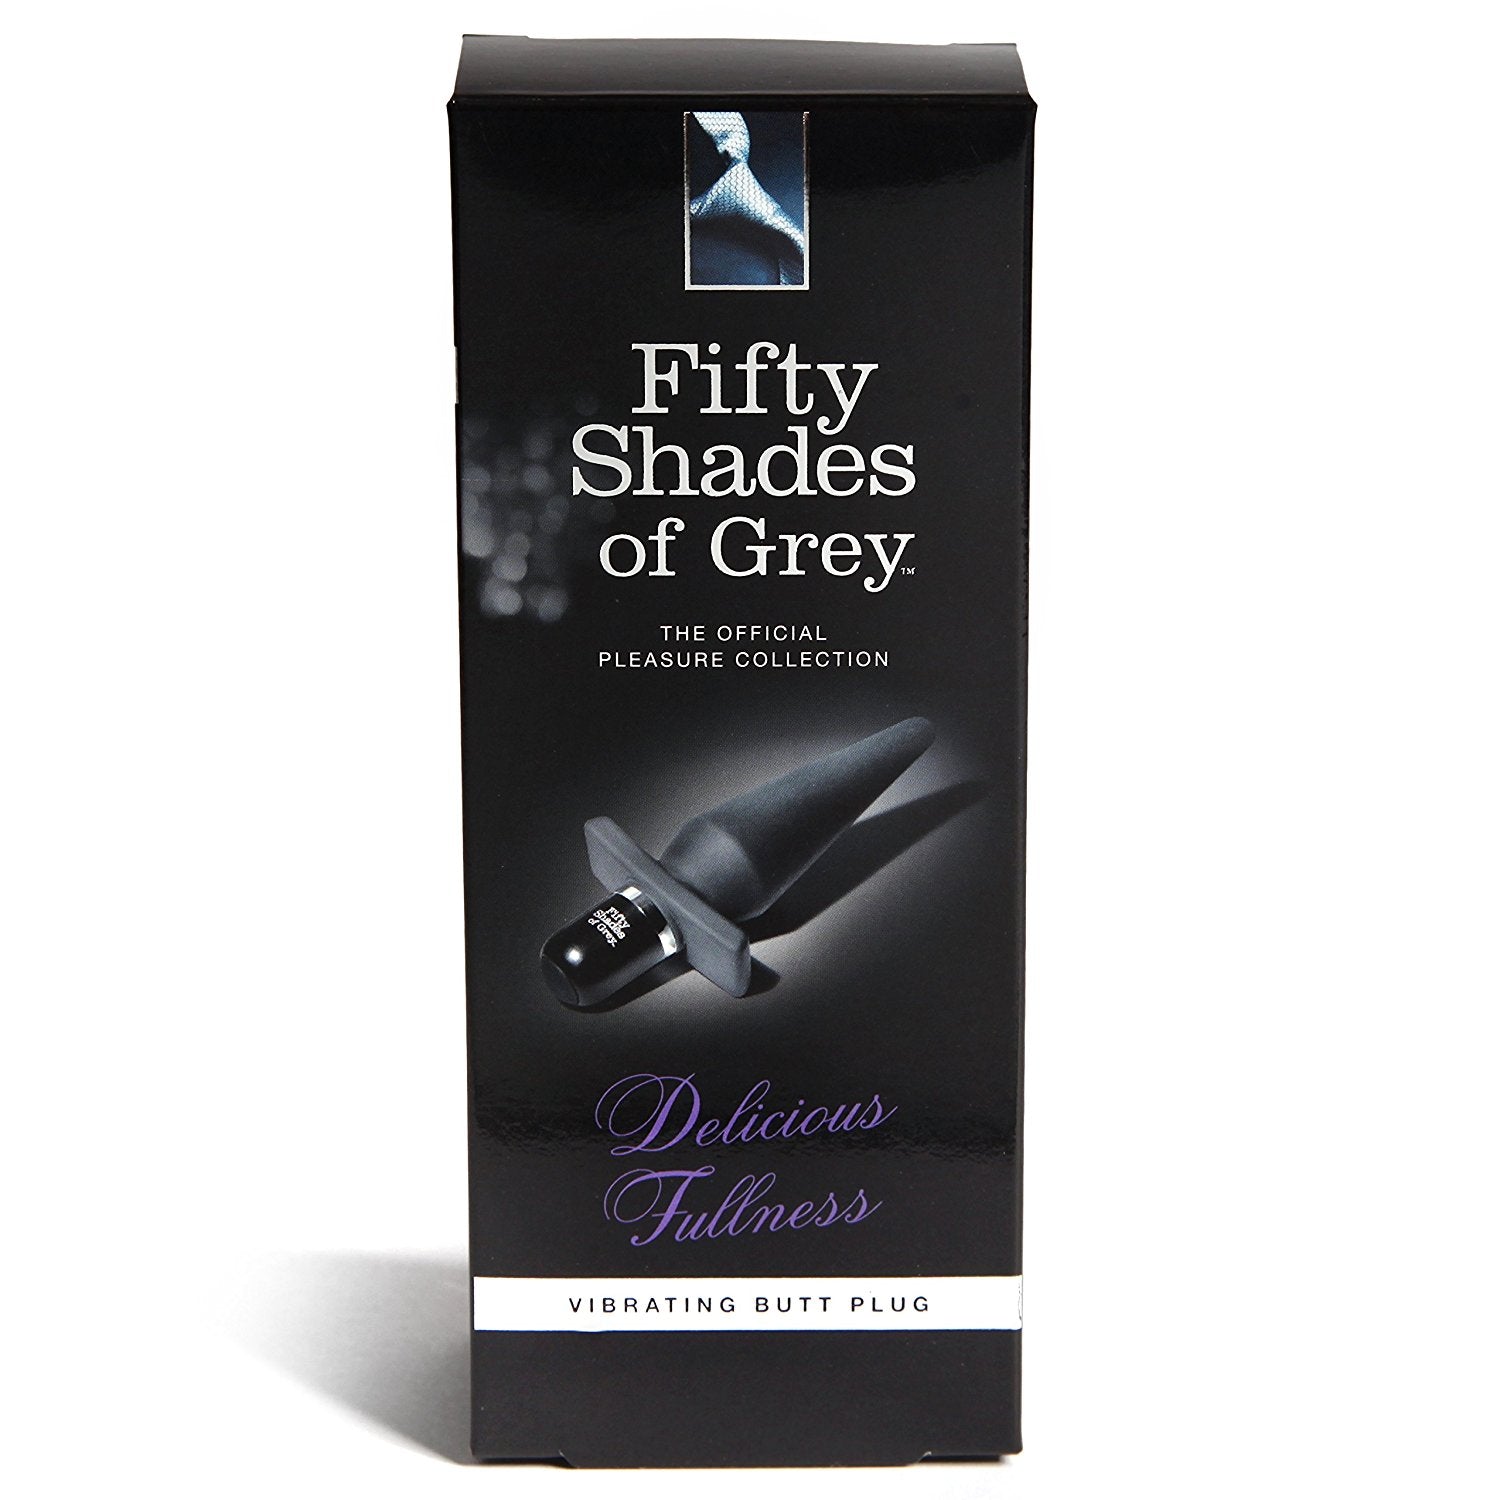 Fifty Shades of Grey - Delicious Fullness Vibrating Butt Plug Anal Plug (Vibration) Non Rechargeable Durio Asia